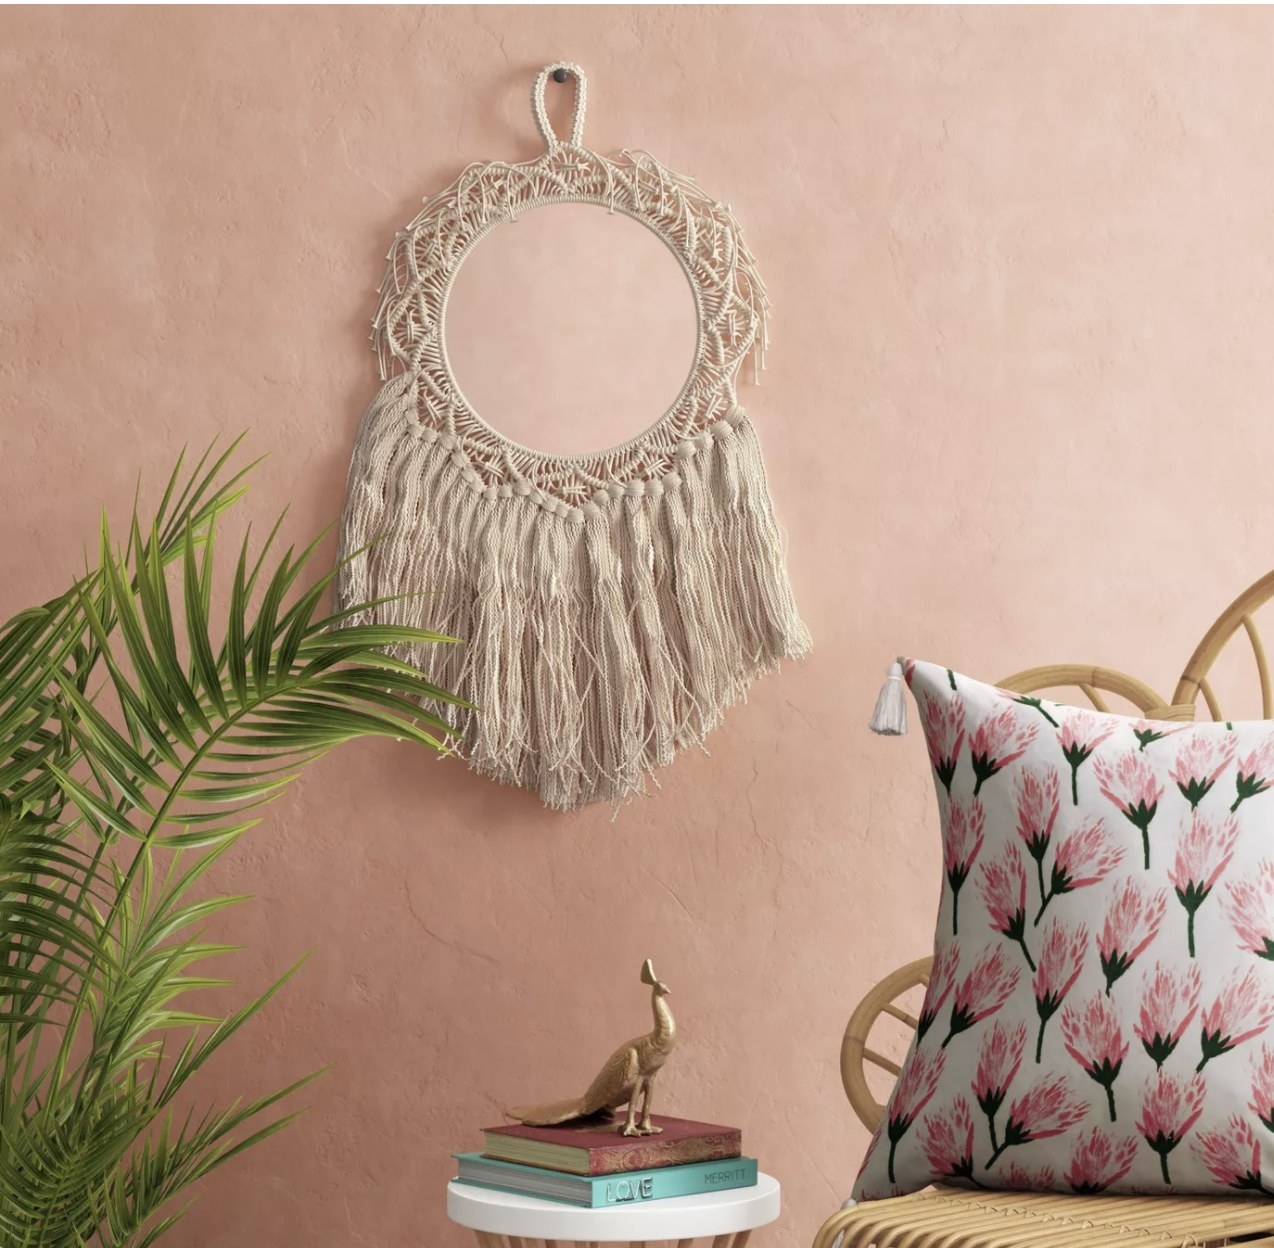 Macrame wall hang placed on pink wall above a chair, side table and plant